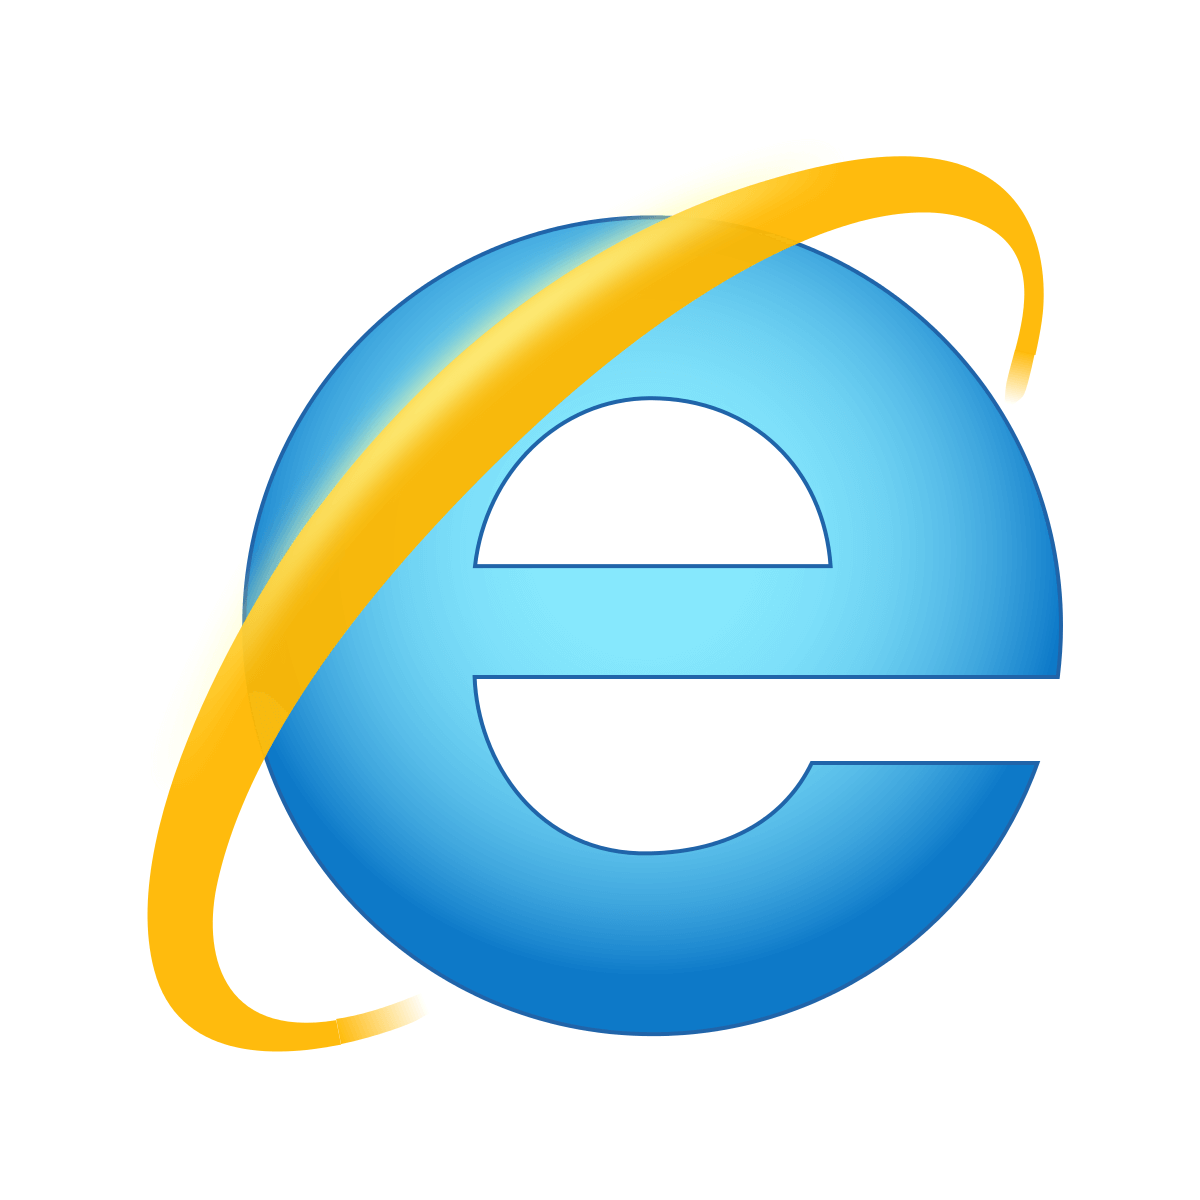 download ie 11 for windows 10